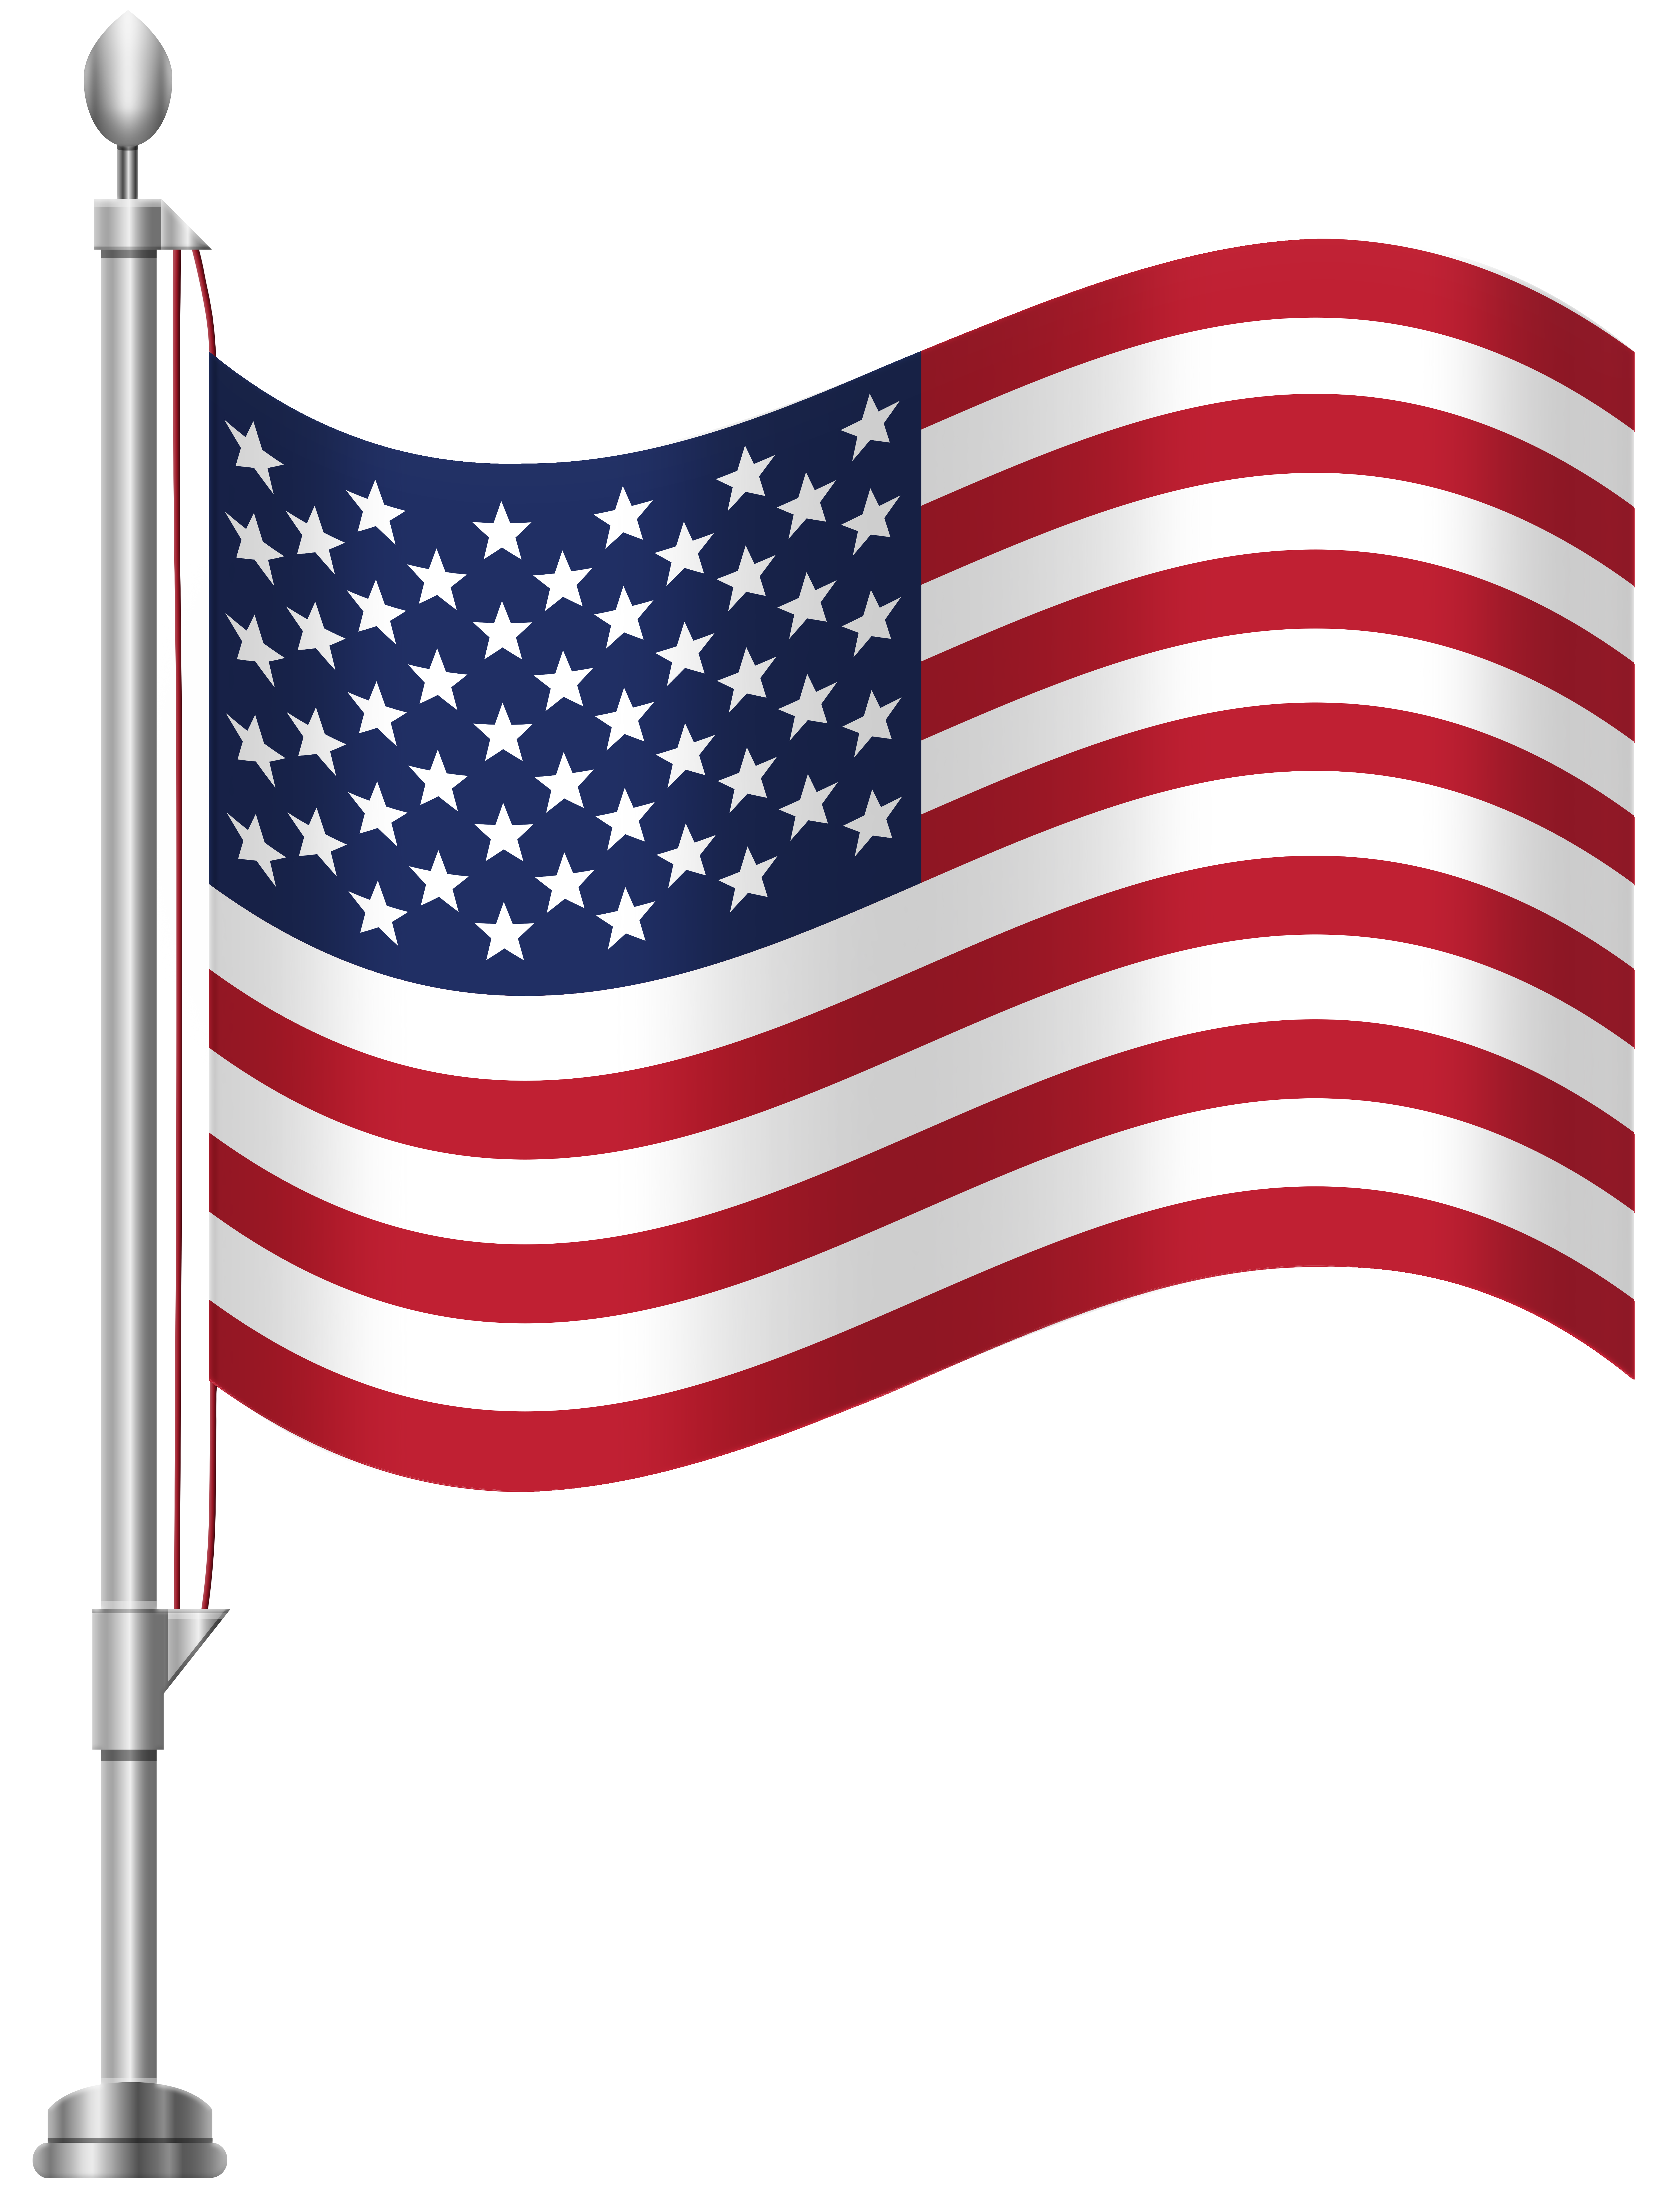 United States of America Flag PNG Clip Art.